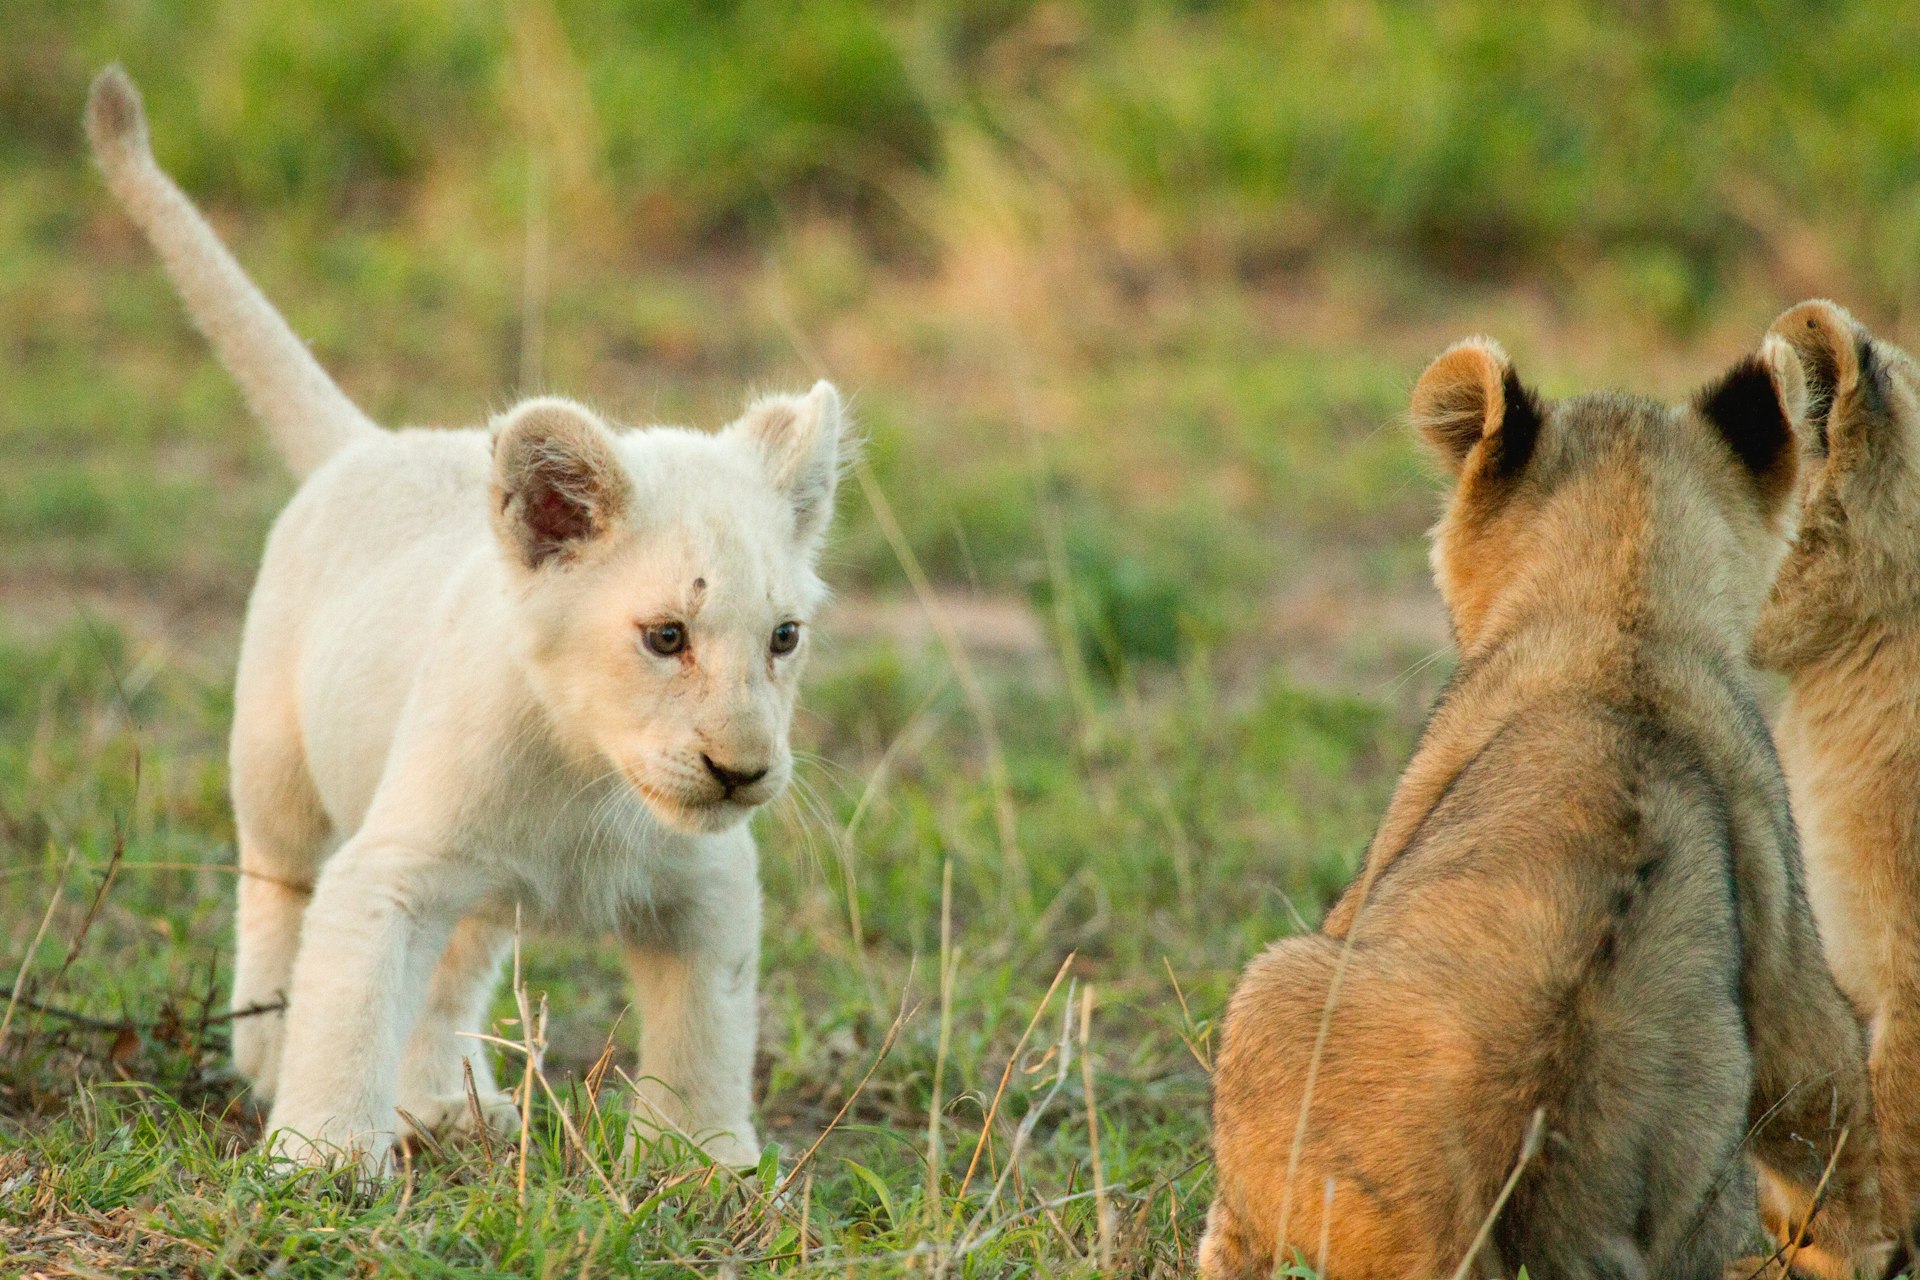 A white lion cub, with tail raised, stands in short green grass facing two tawny-coloured cubs who are sitting and looking towards her.